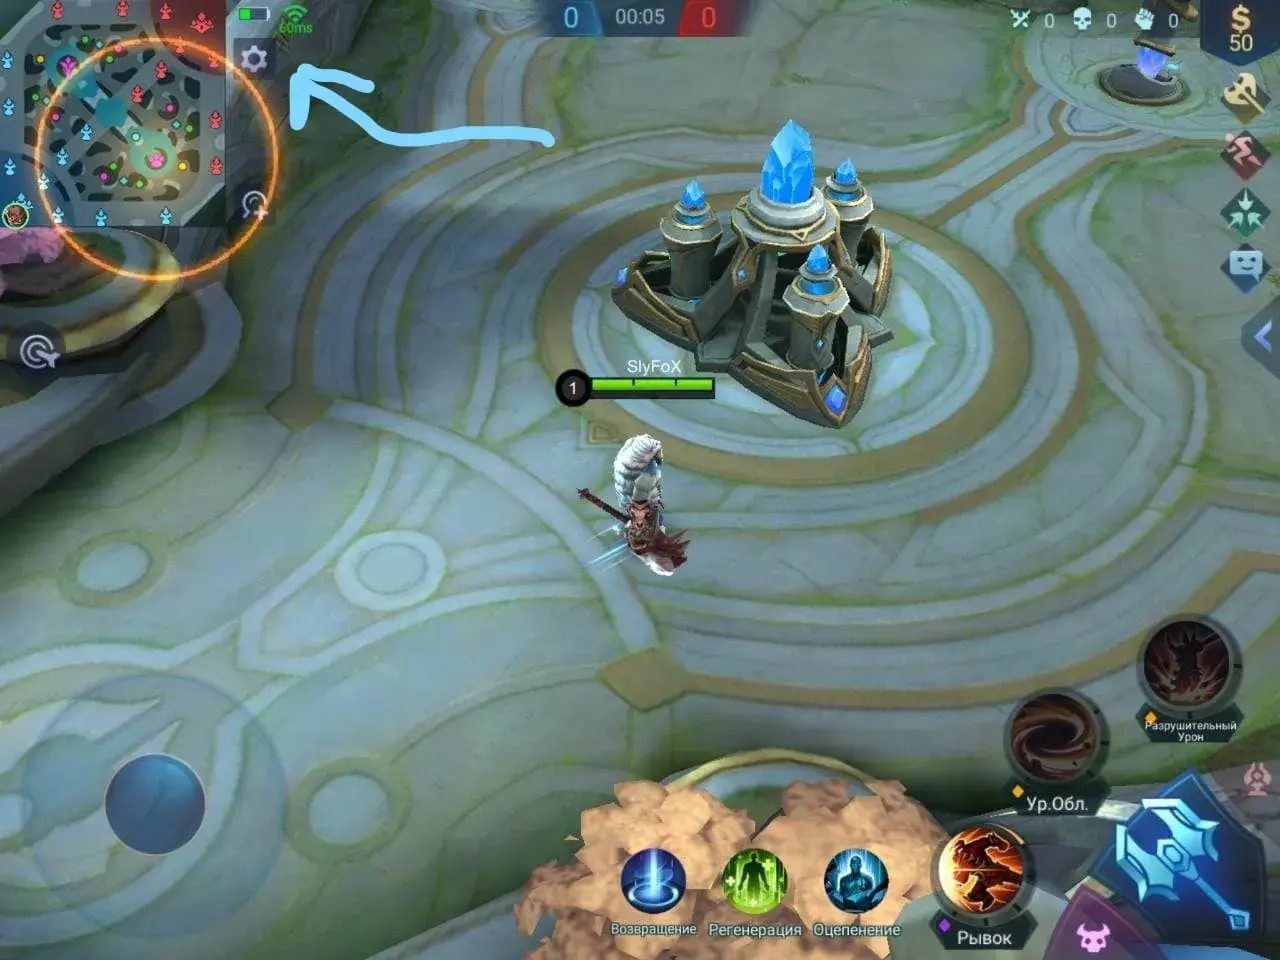 Speed Mode in Mobile Legends